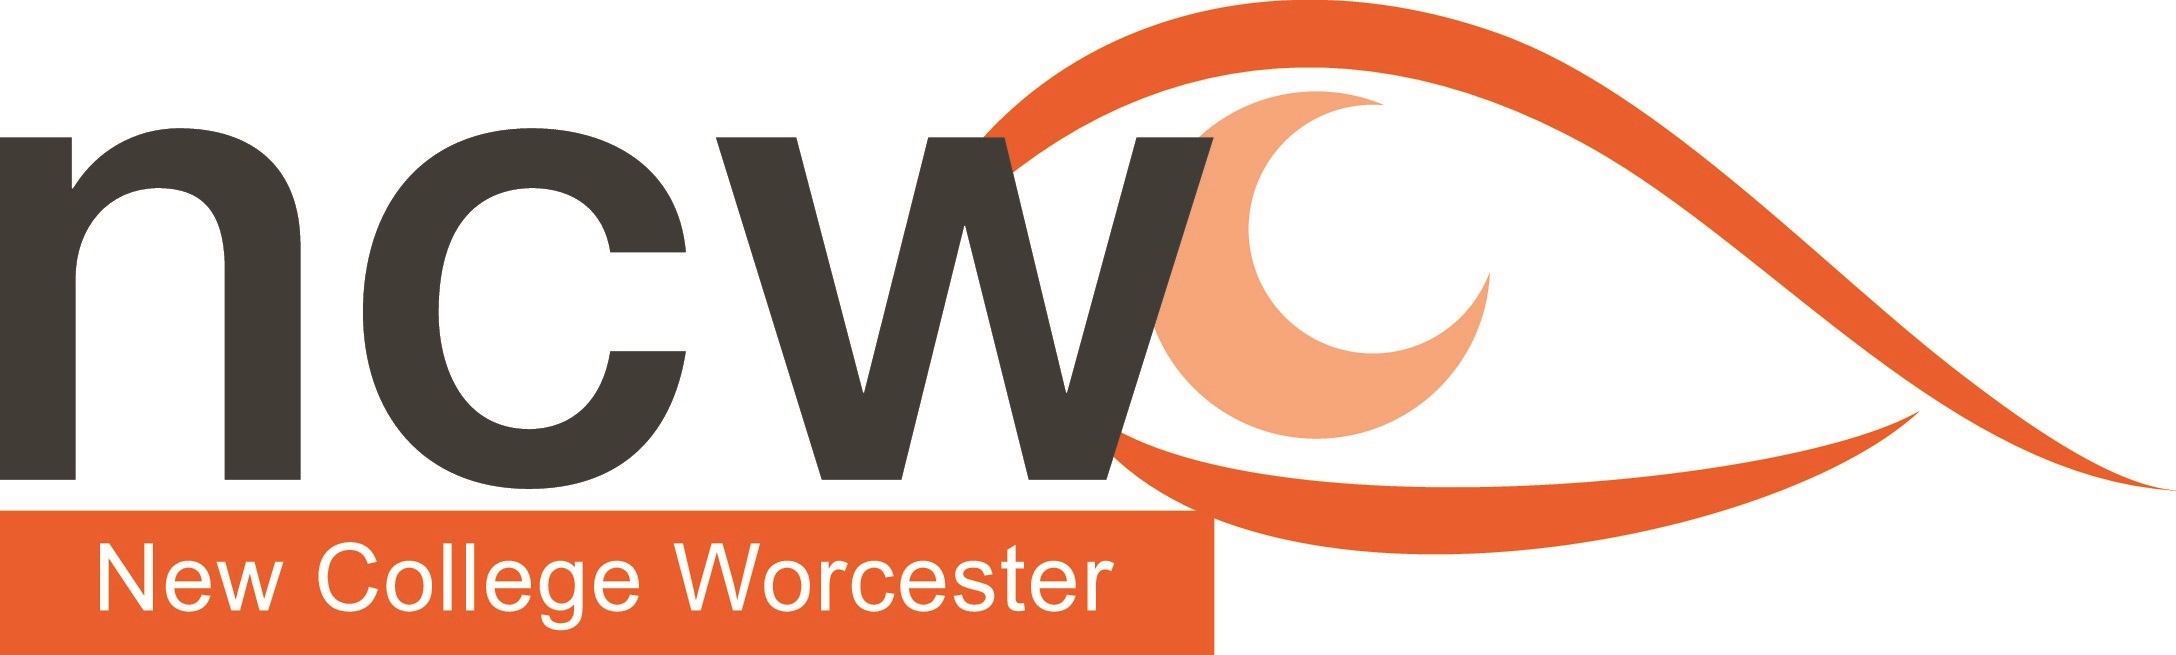 New College Worcester Image